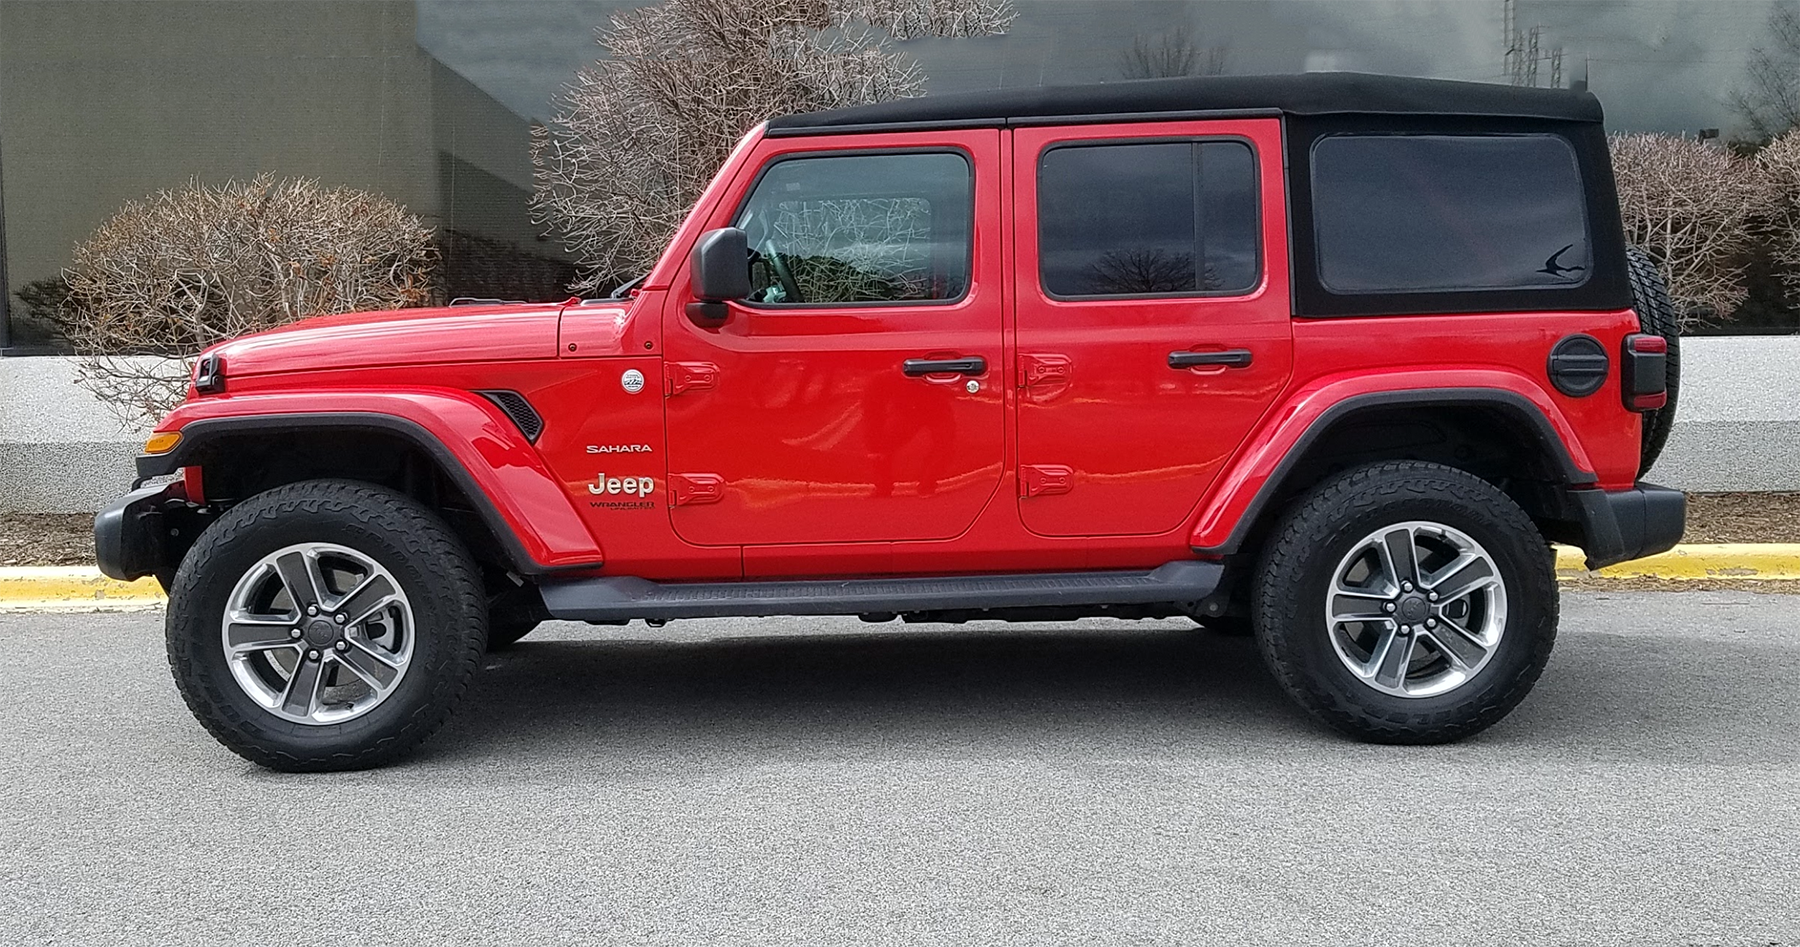 Quick Spin: 2020 Jeep Wrangler Unlimited EcoDiesel | The Daily Drive |  Consumer Guide® The Daily Drive | Consumer Guide®